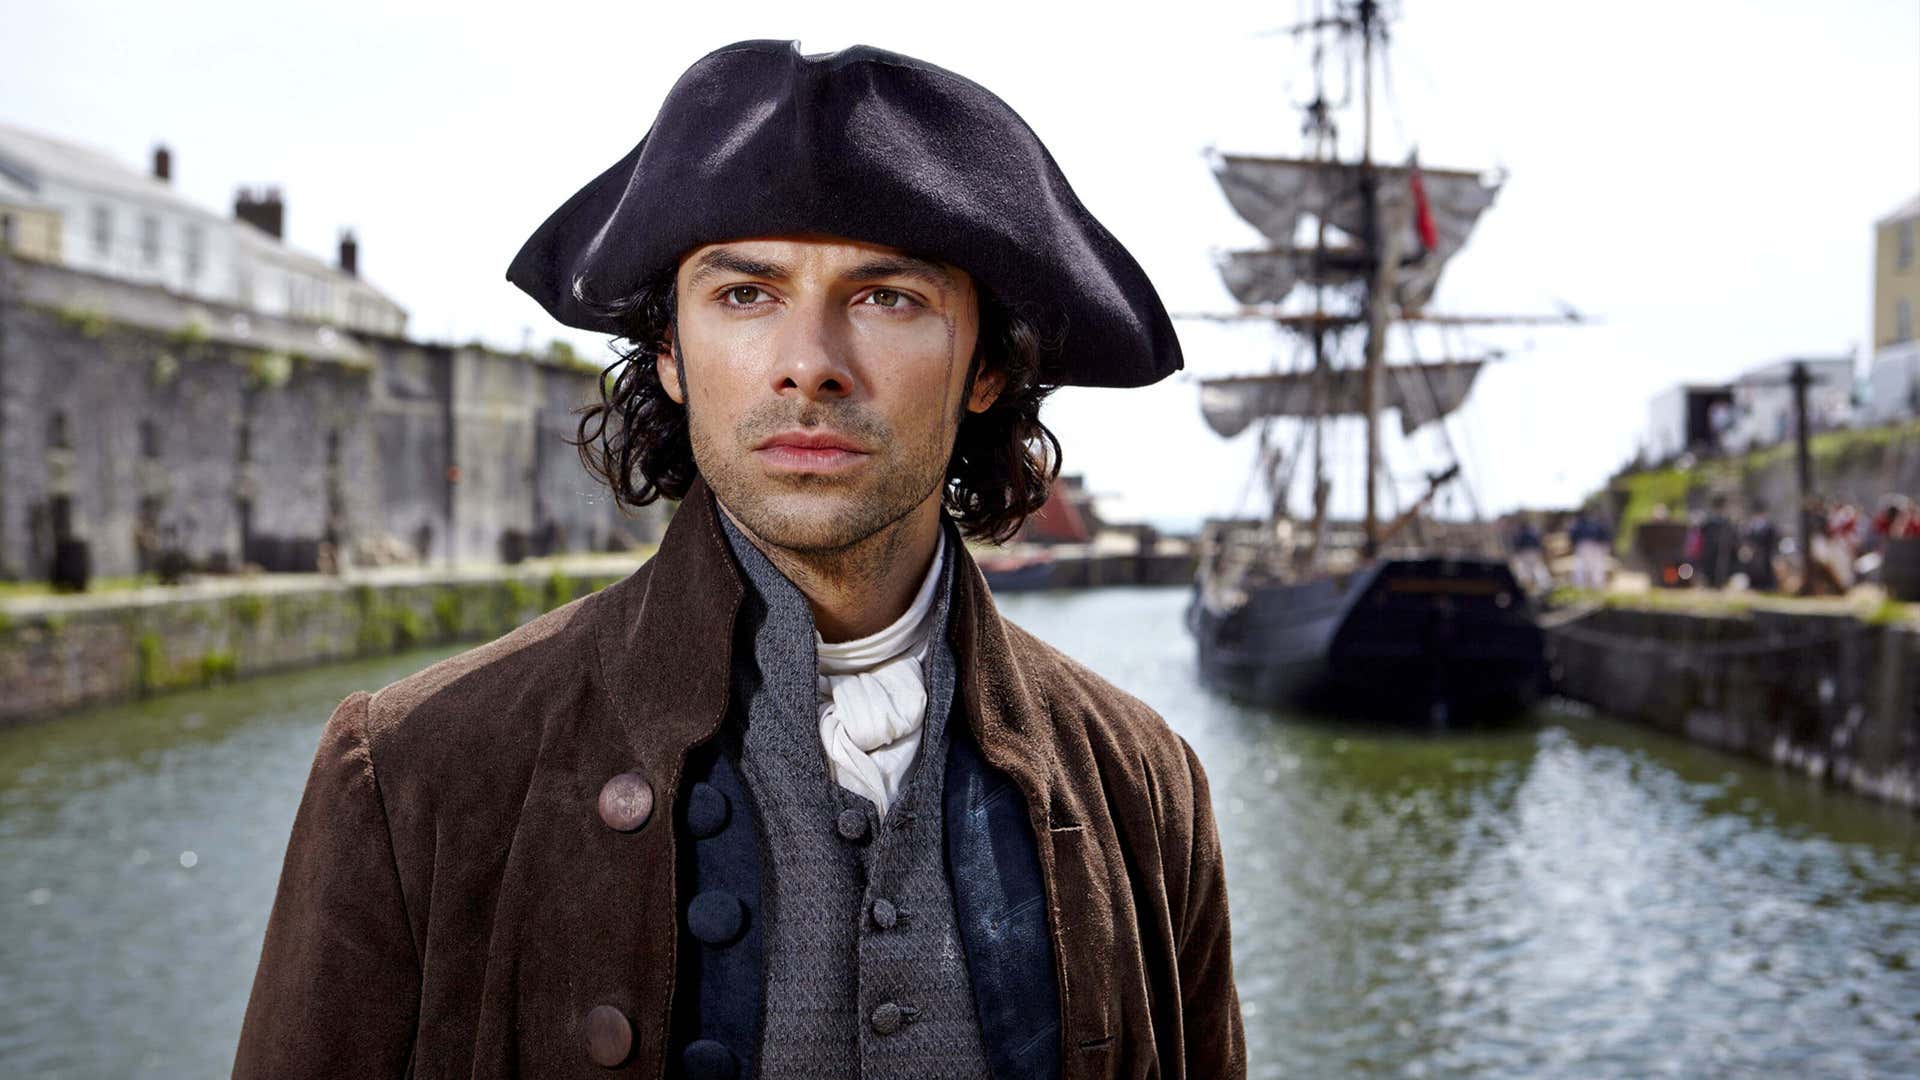 Ross Poldark: Narcissism in TV and movies